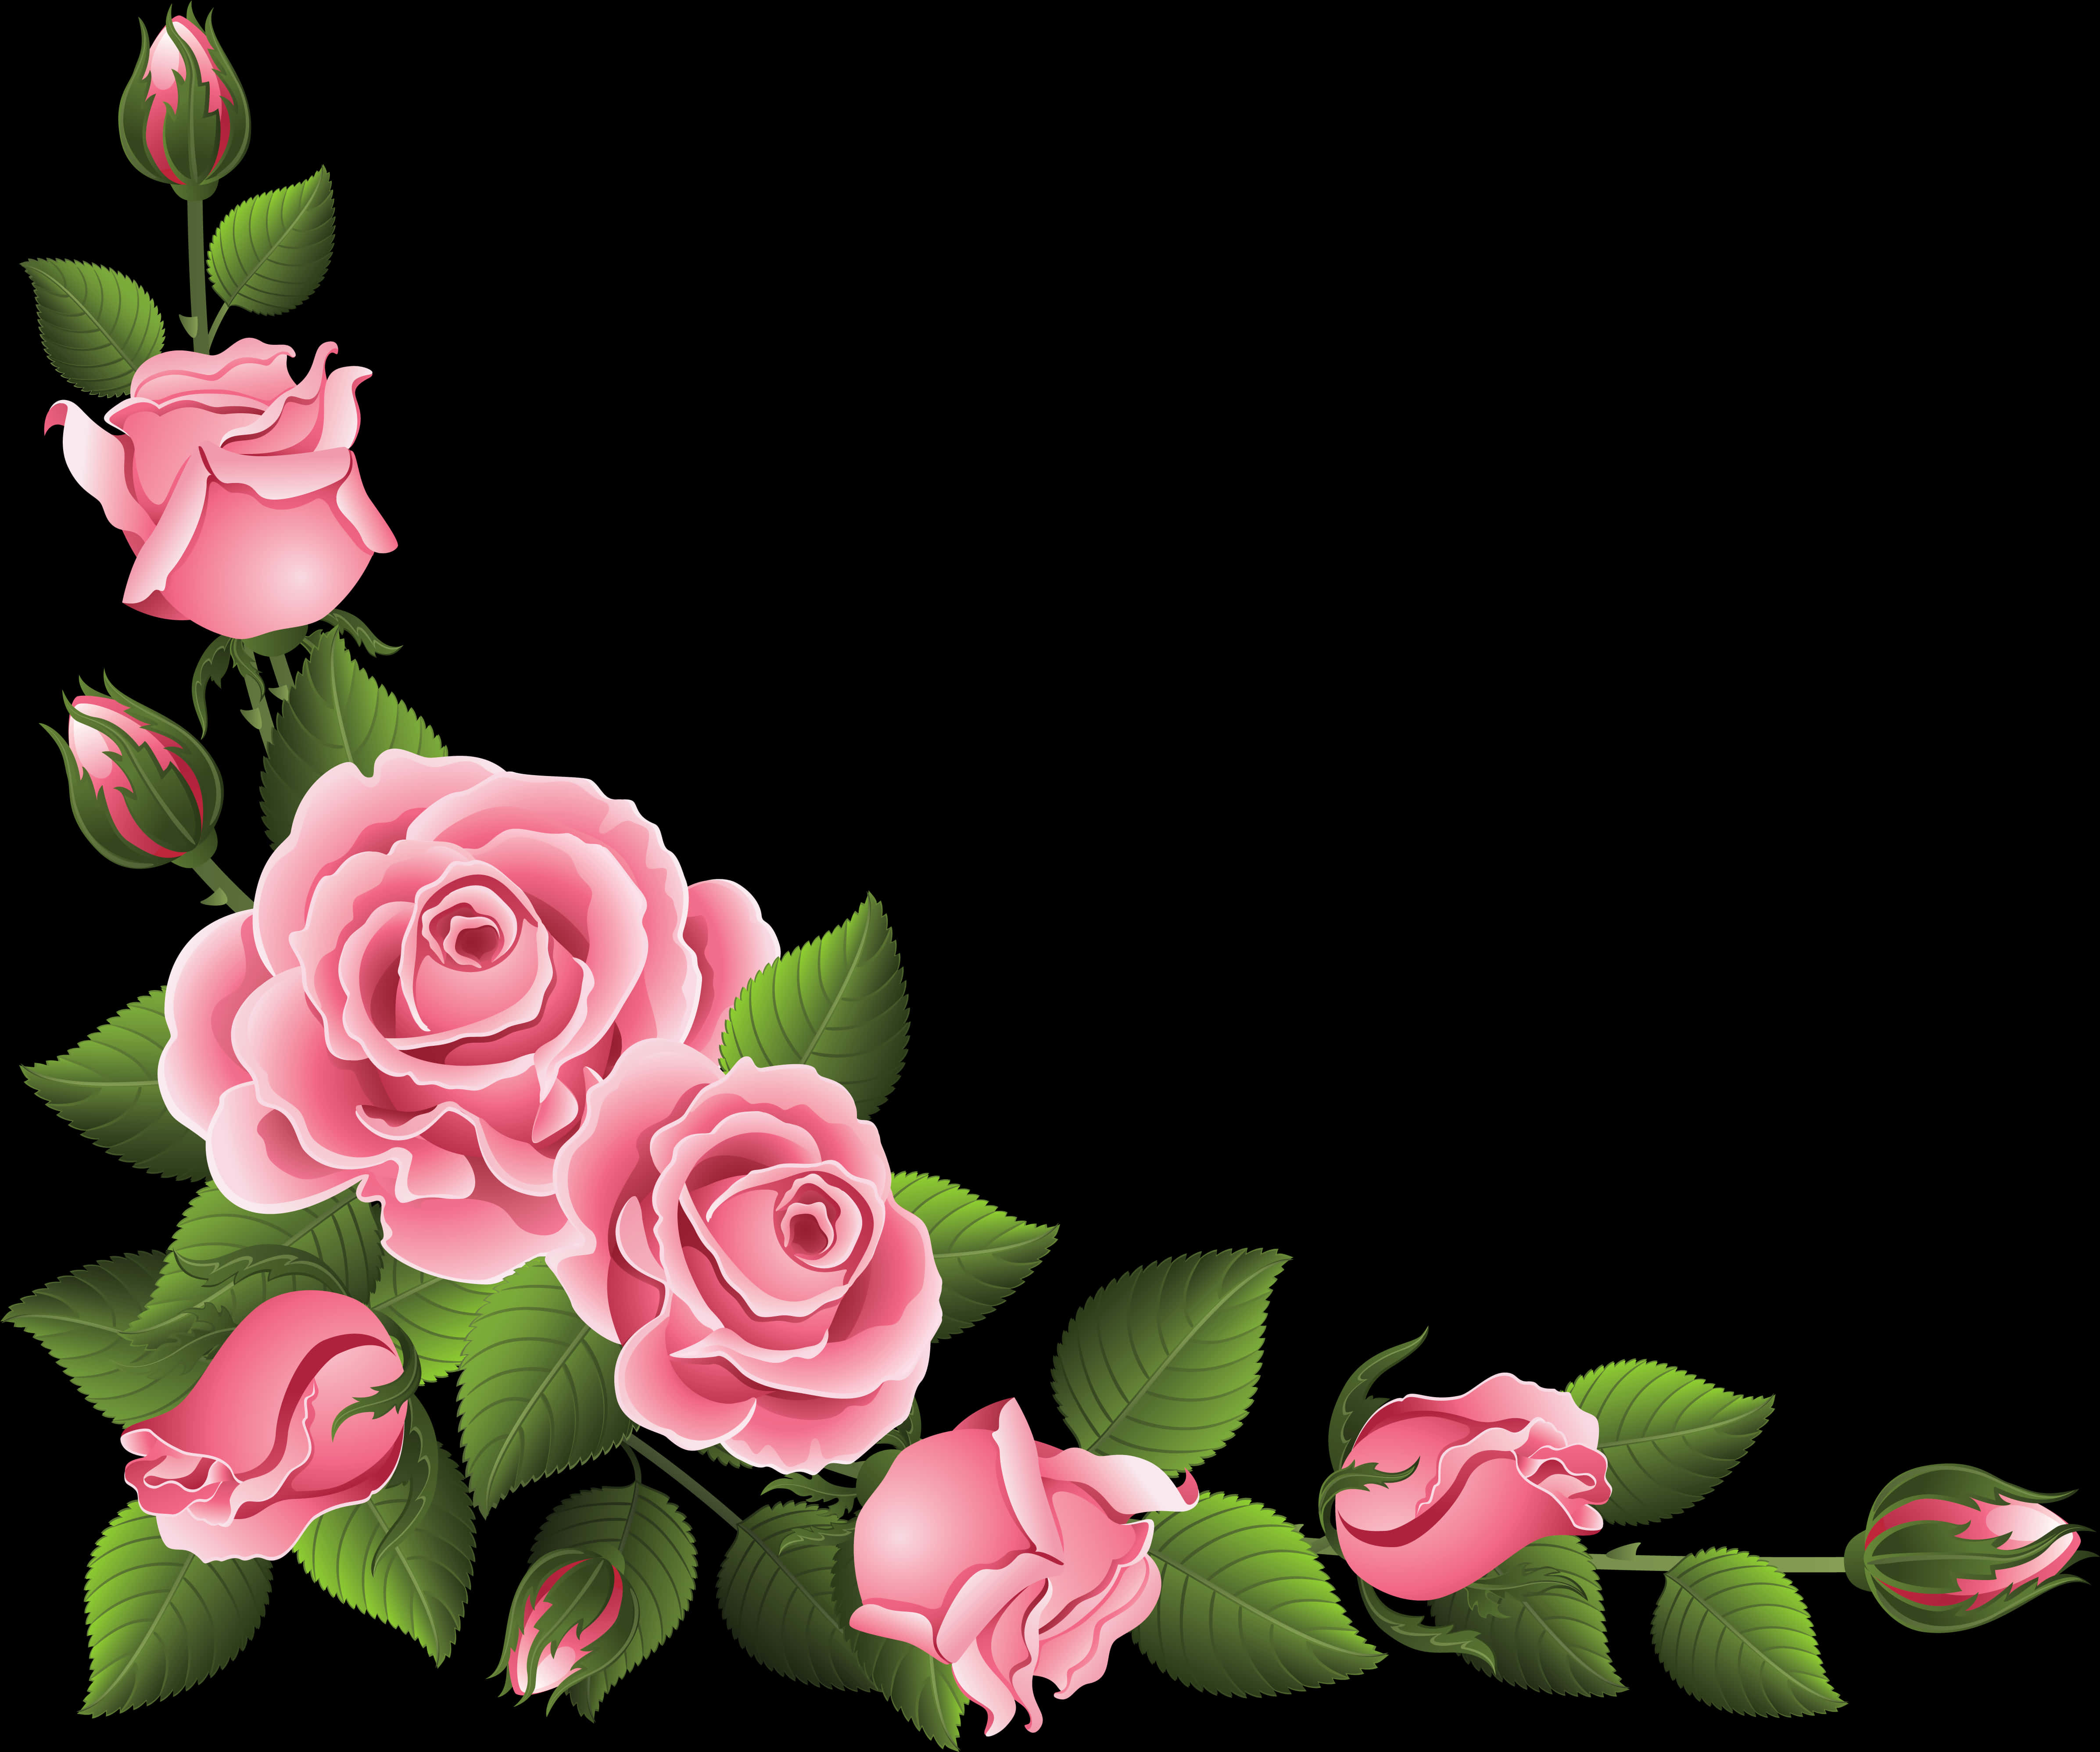 A Pink Roses And Green Leaves